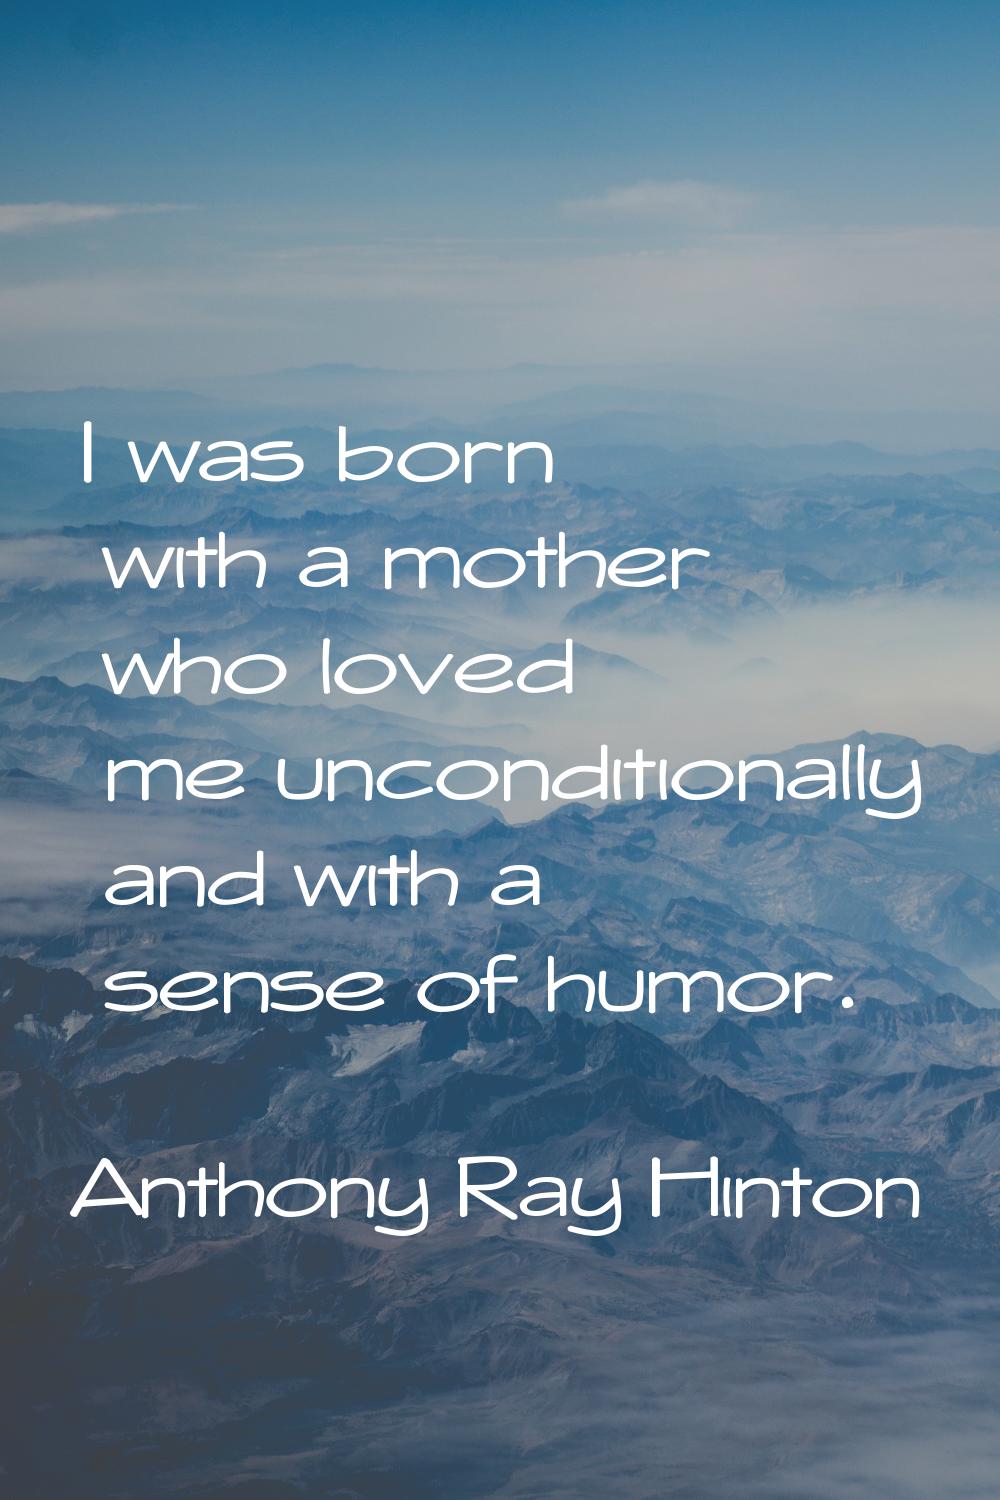 I was born with a mother who loved me unconditionally and with a sense of humor.